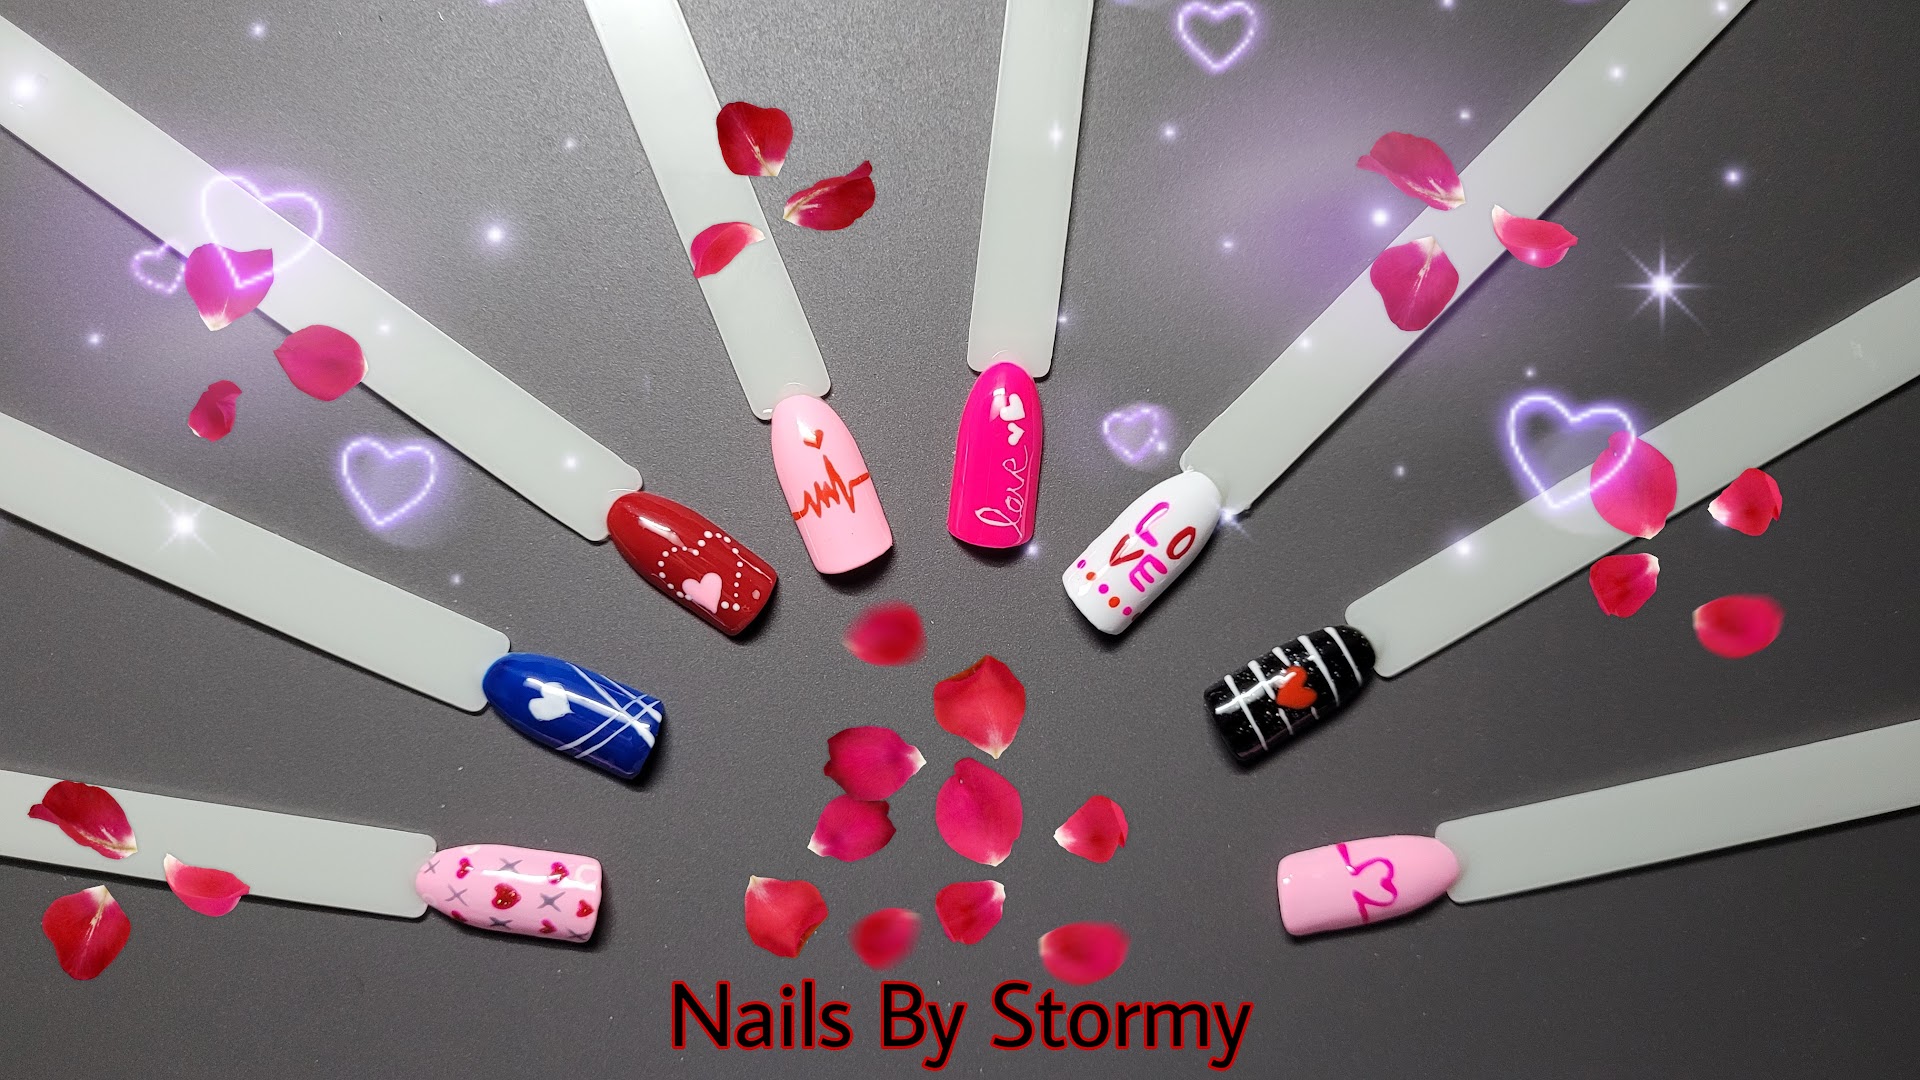 Nails By Stormy